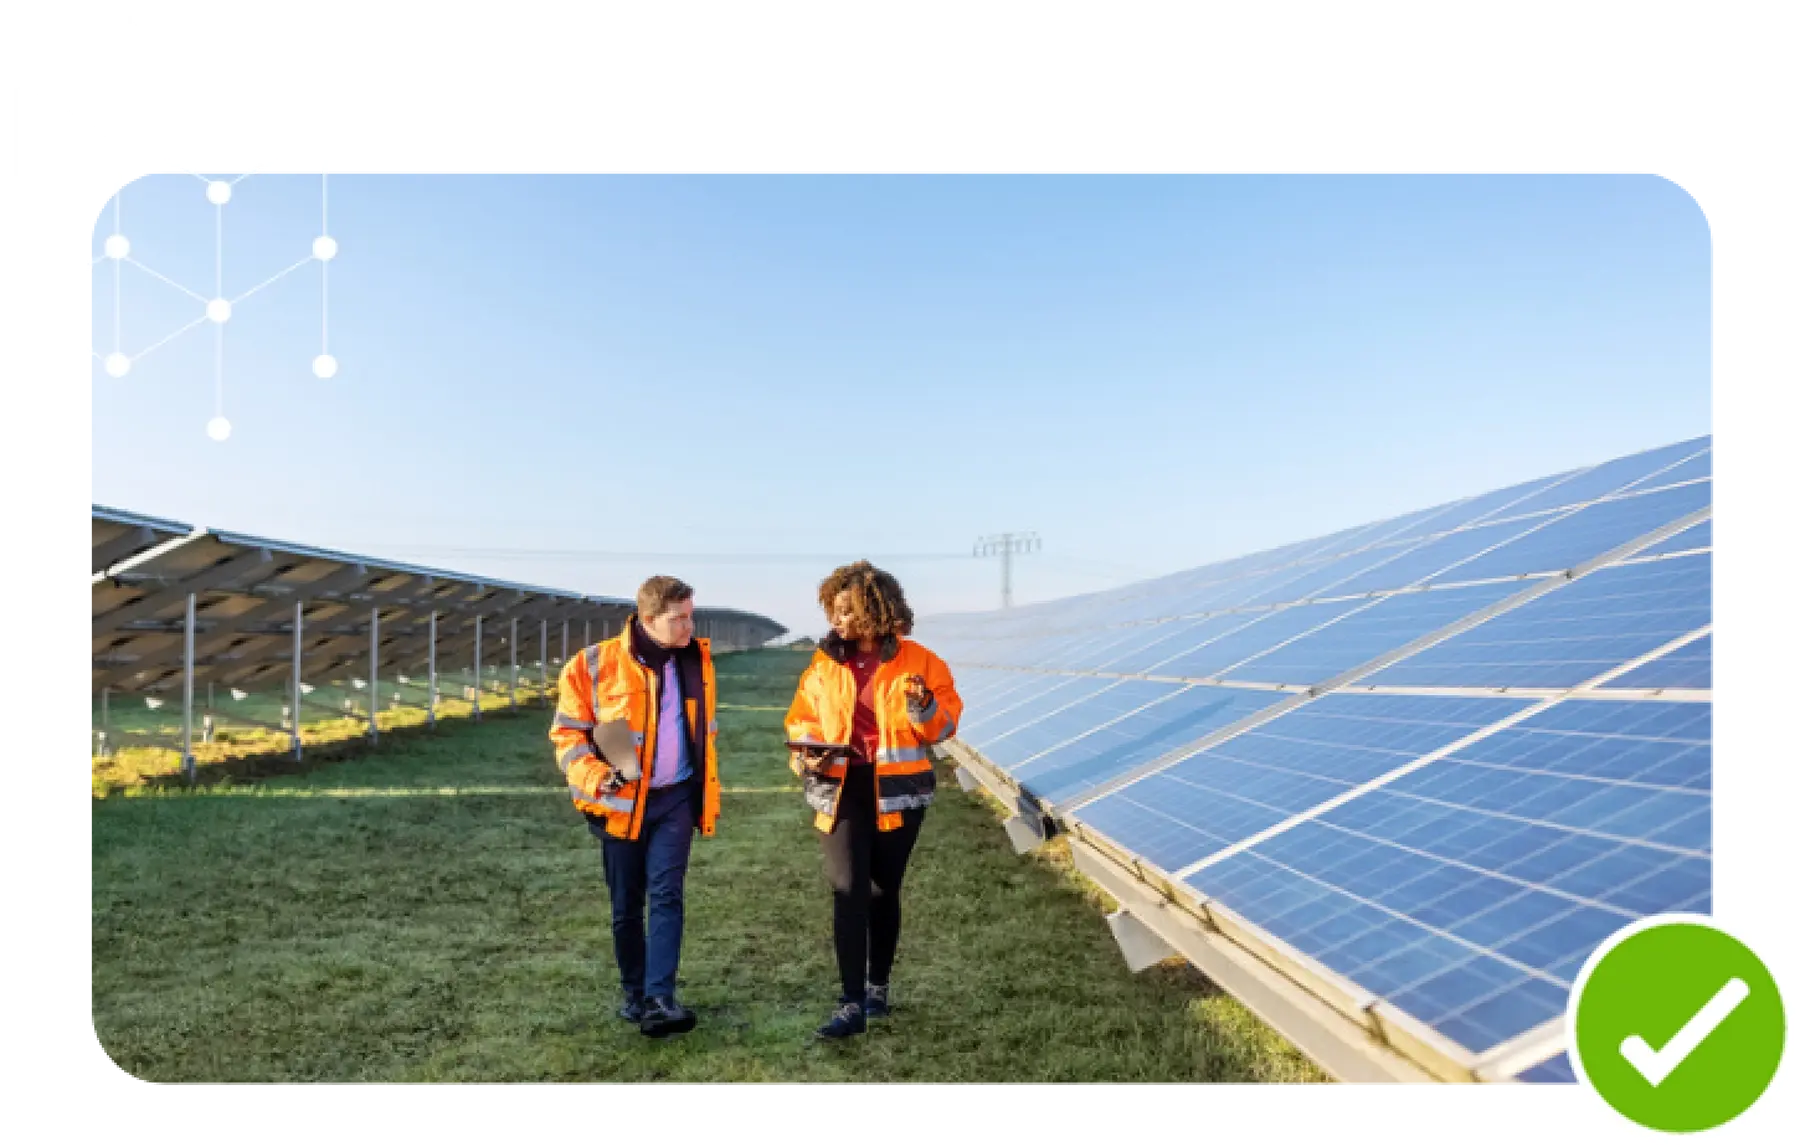 An image of two people walking near solar panels.